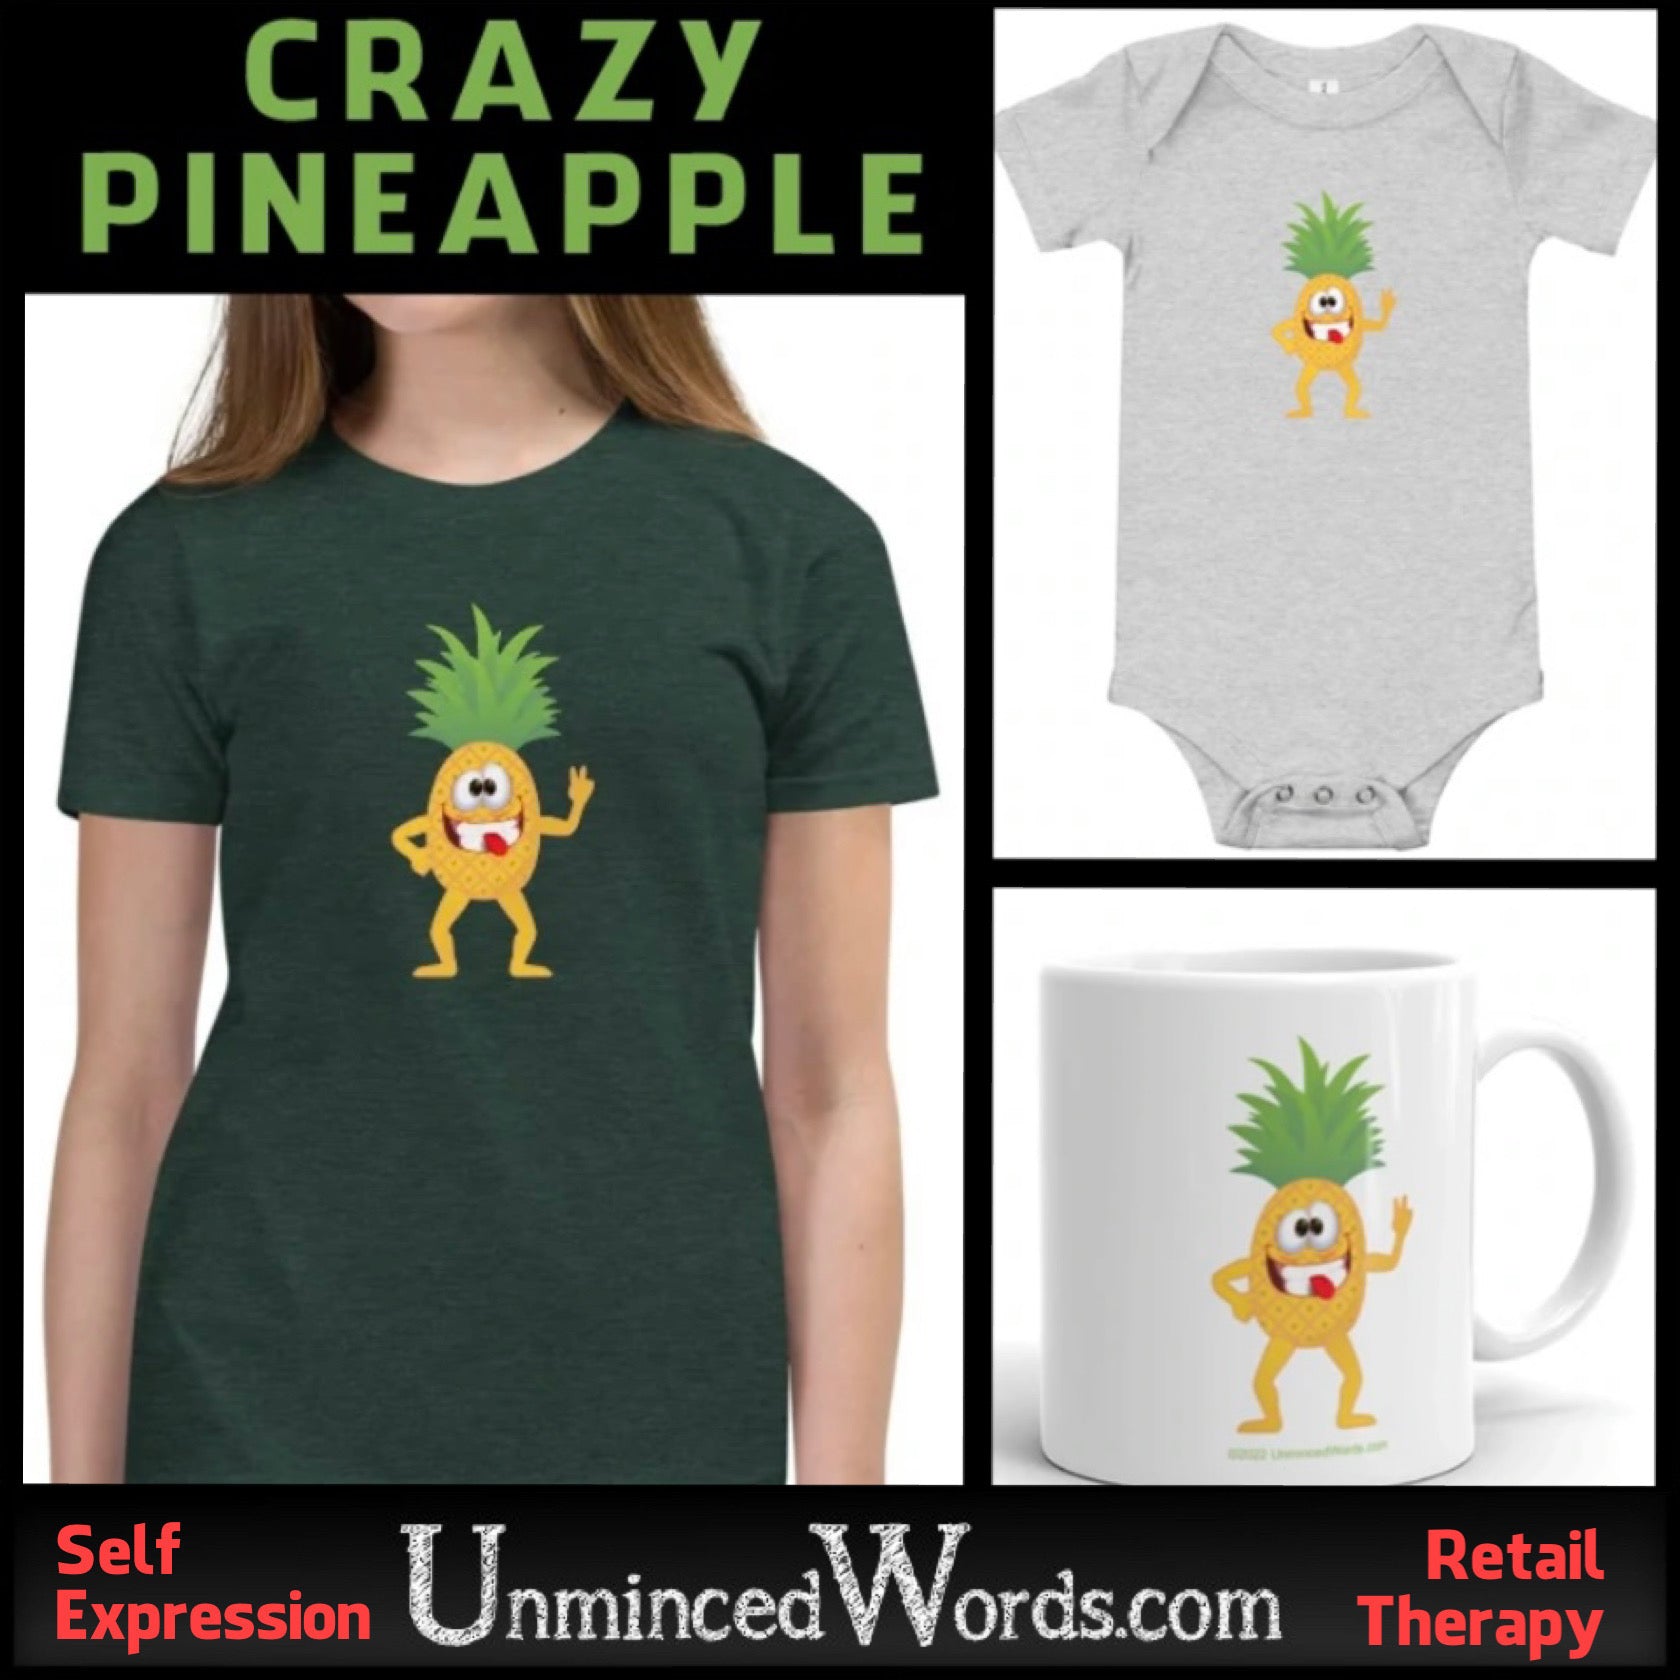 The wacky new collection: CRAZY PINEAPPLE